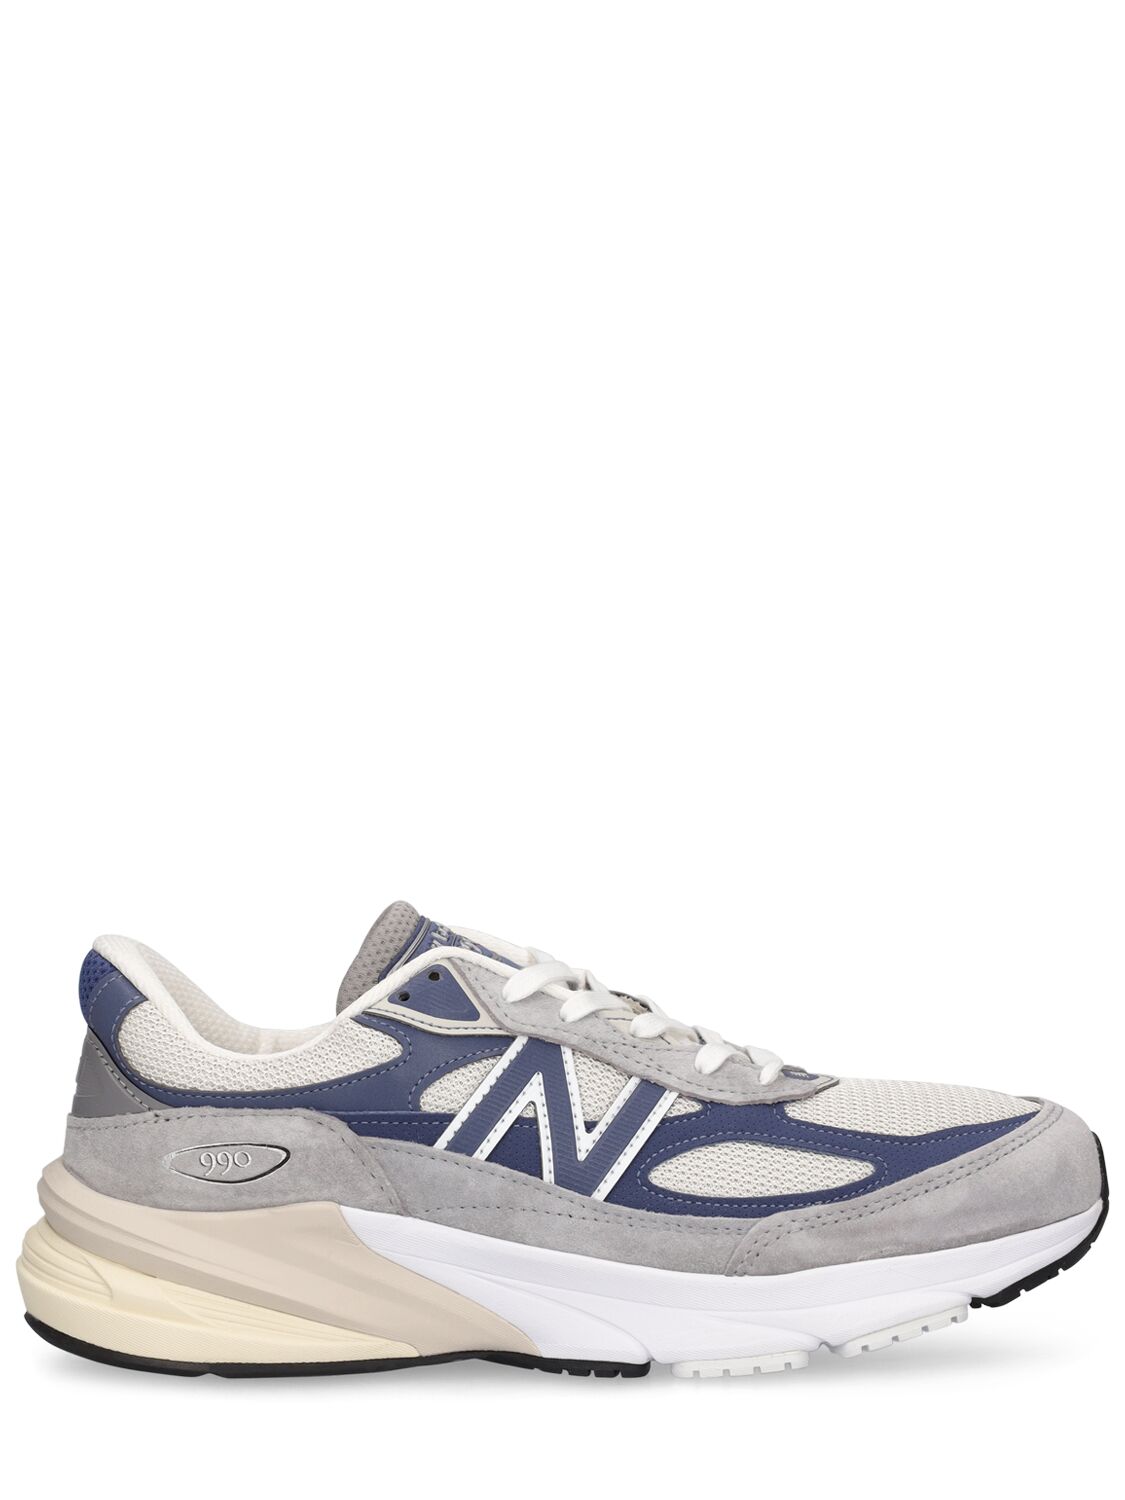 Image of 990 V6 Sneakers